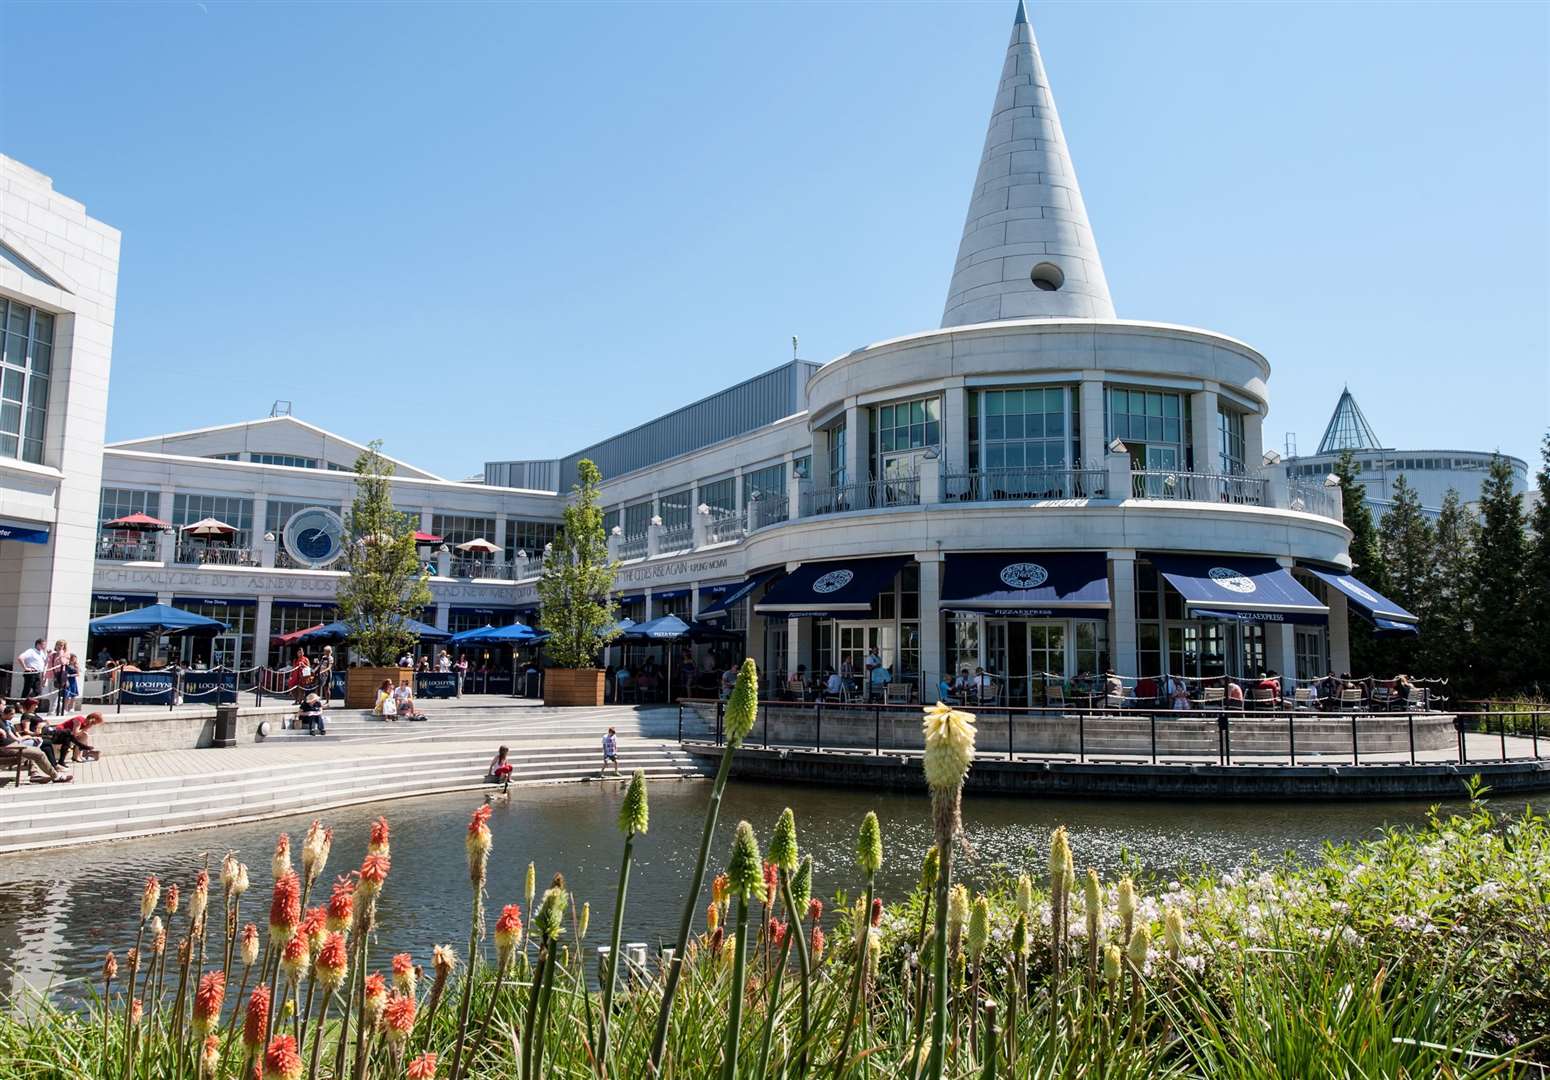 A pop up event is being held at Bluewater in Greenhithe next week